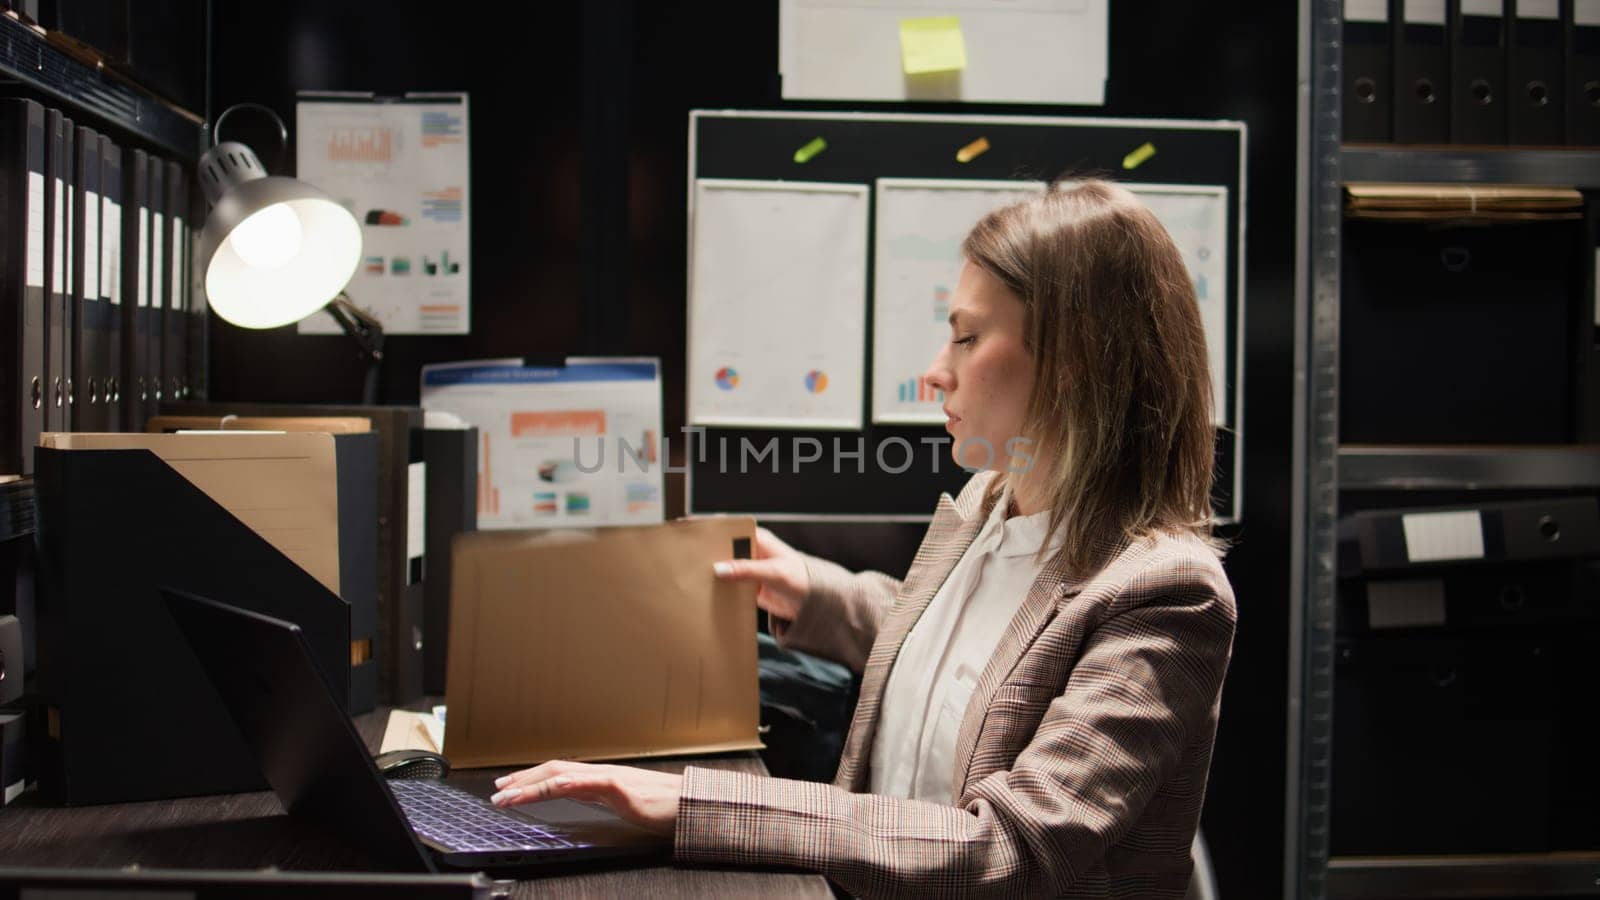 Close-up of caucasian female detective closing laptop and folder, leaving her workstation. After obtaining information to solve criminal investigation, policewoman stands and exits the evidence room.